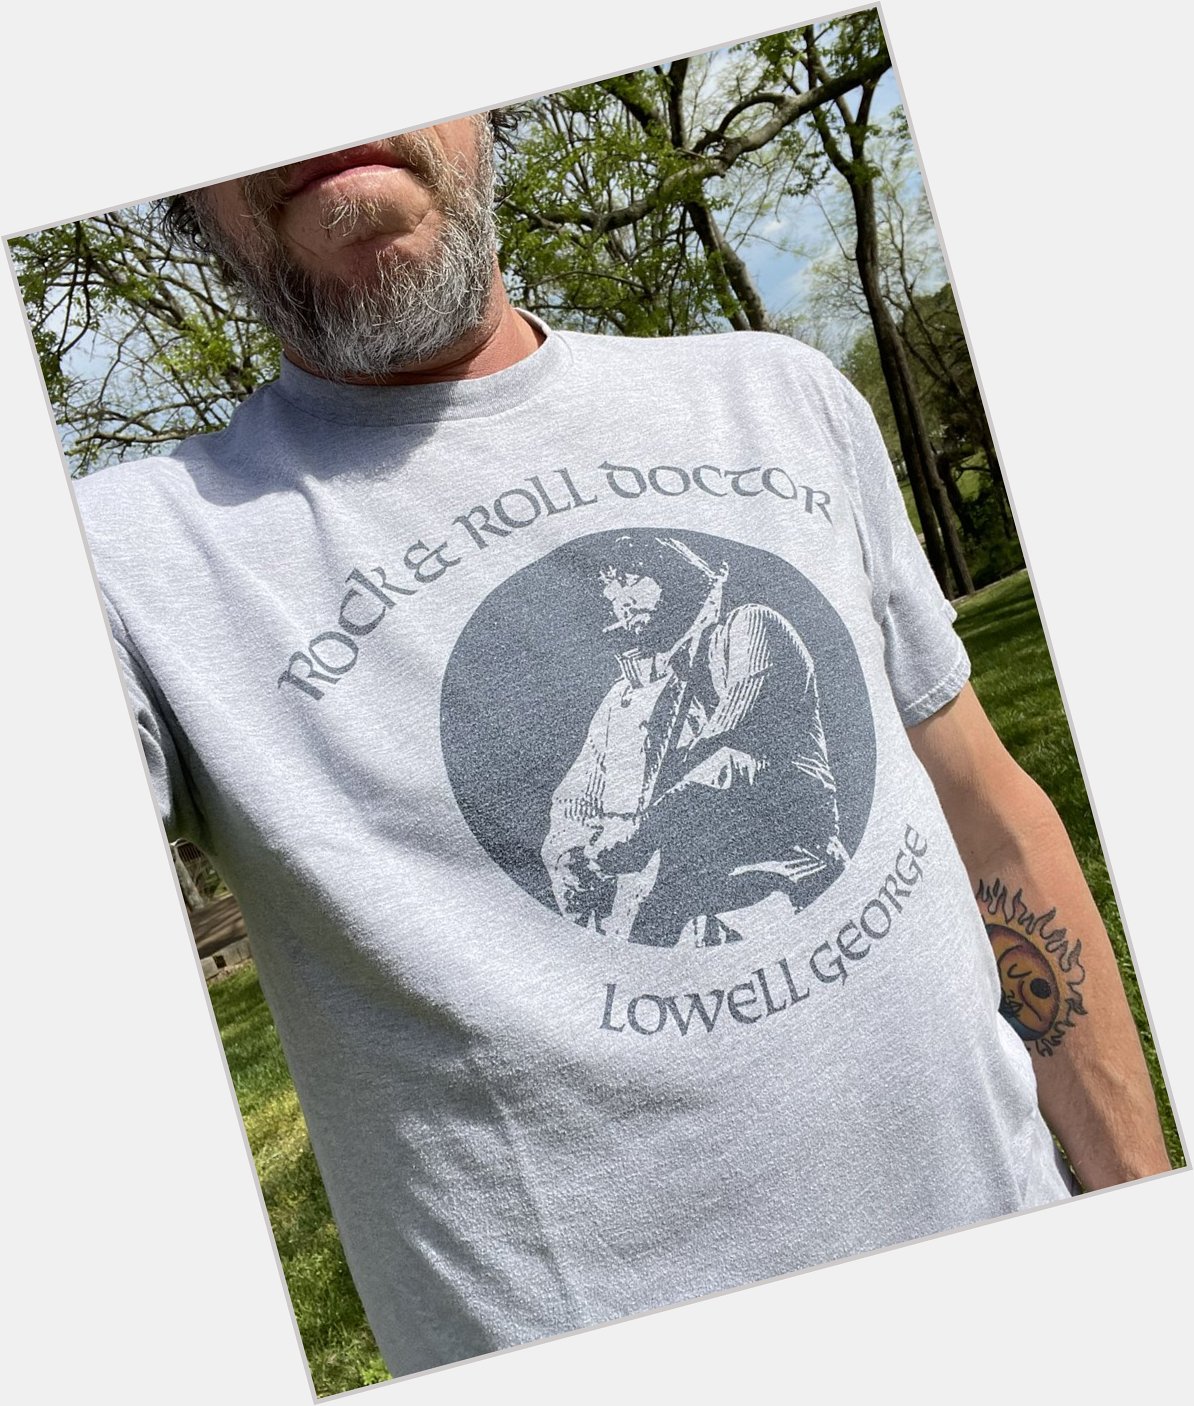 Happy Birthday Lowell George, the original architect of one of my favorite bands,  